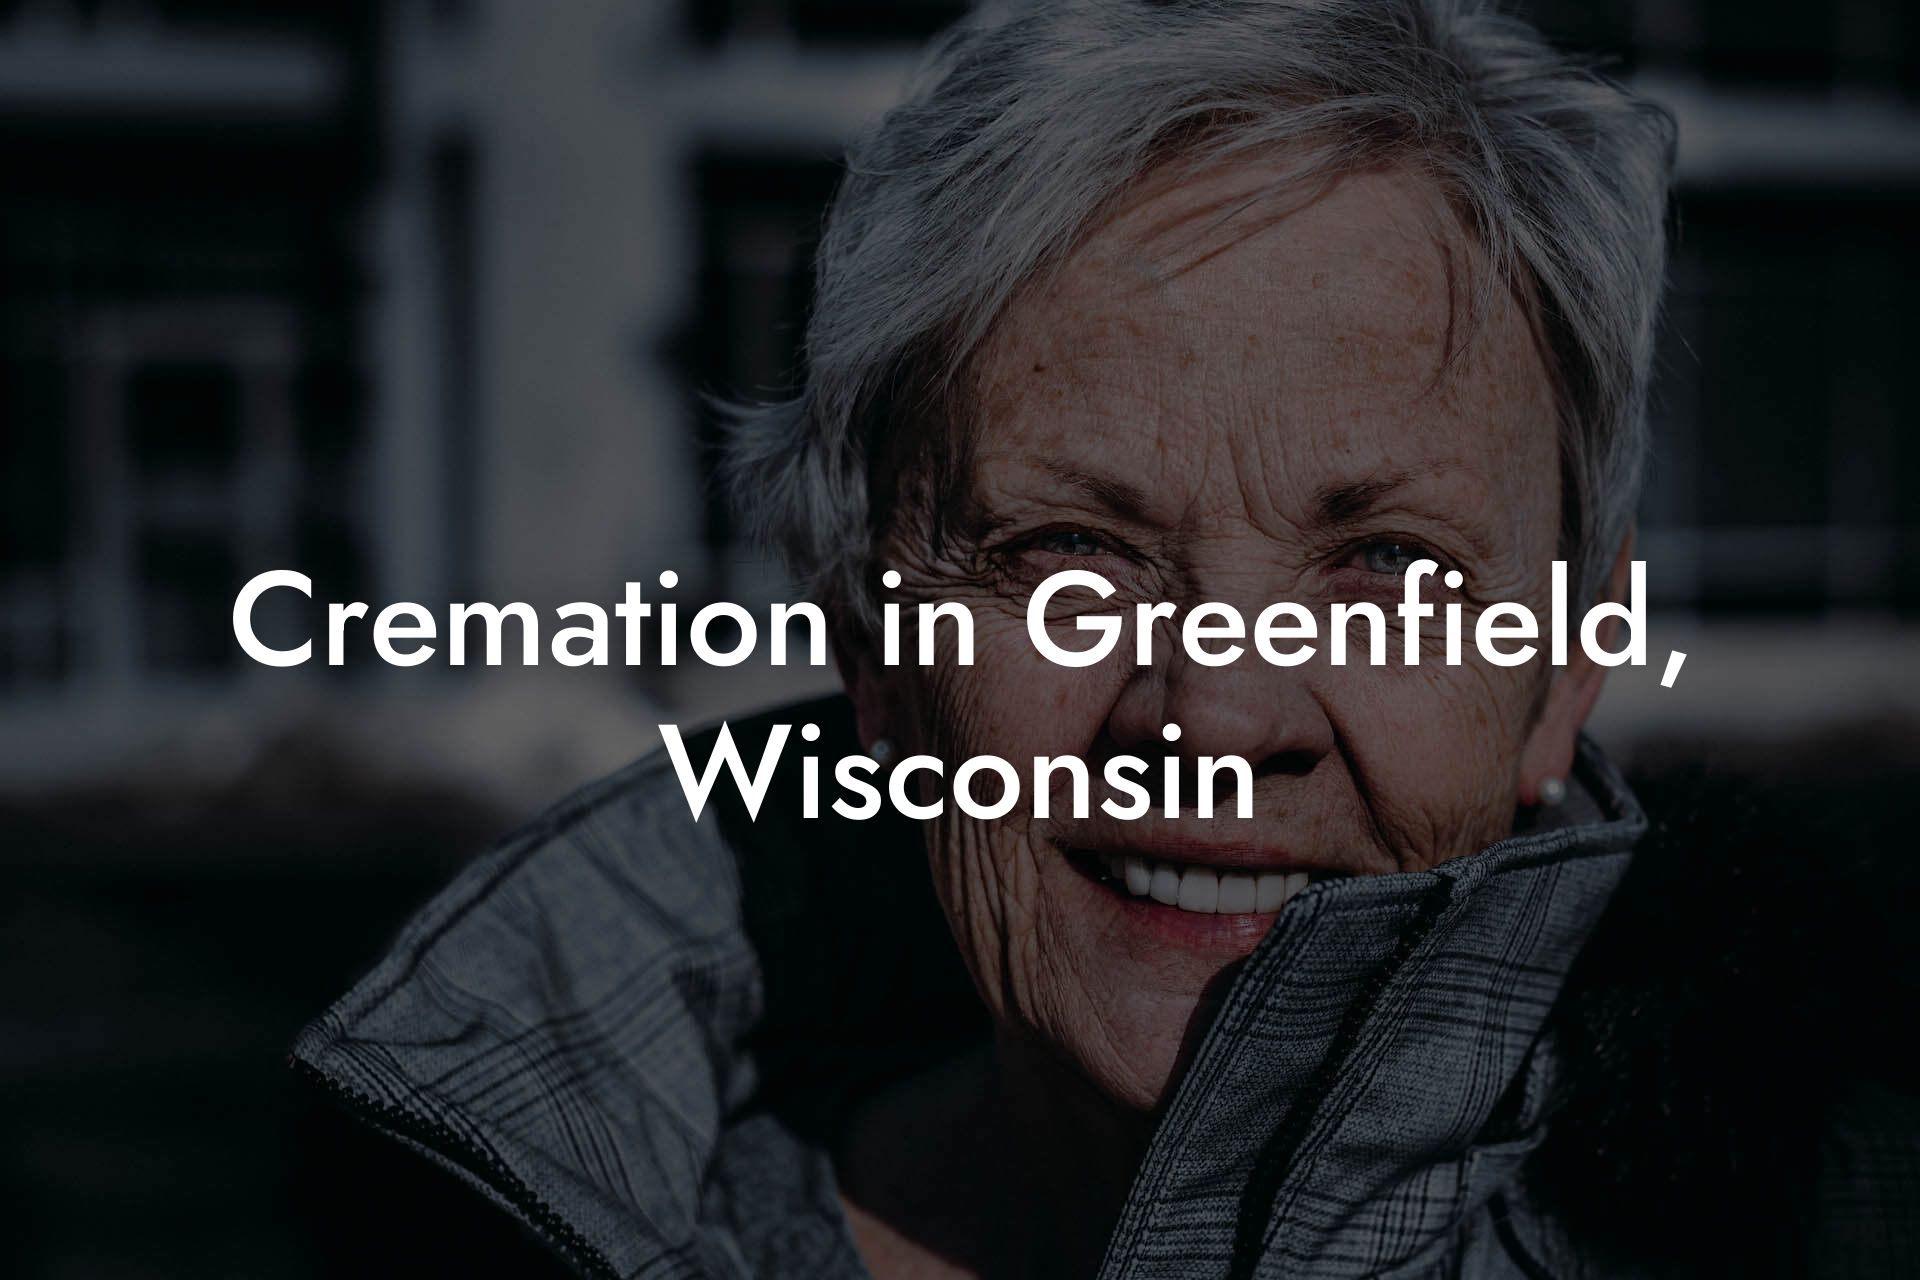 Cremation in Greenfield, Wisconsin